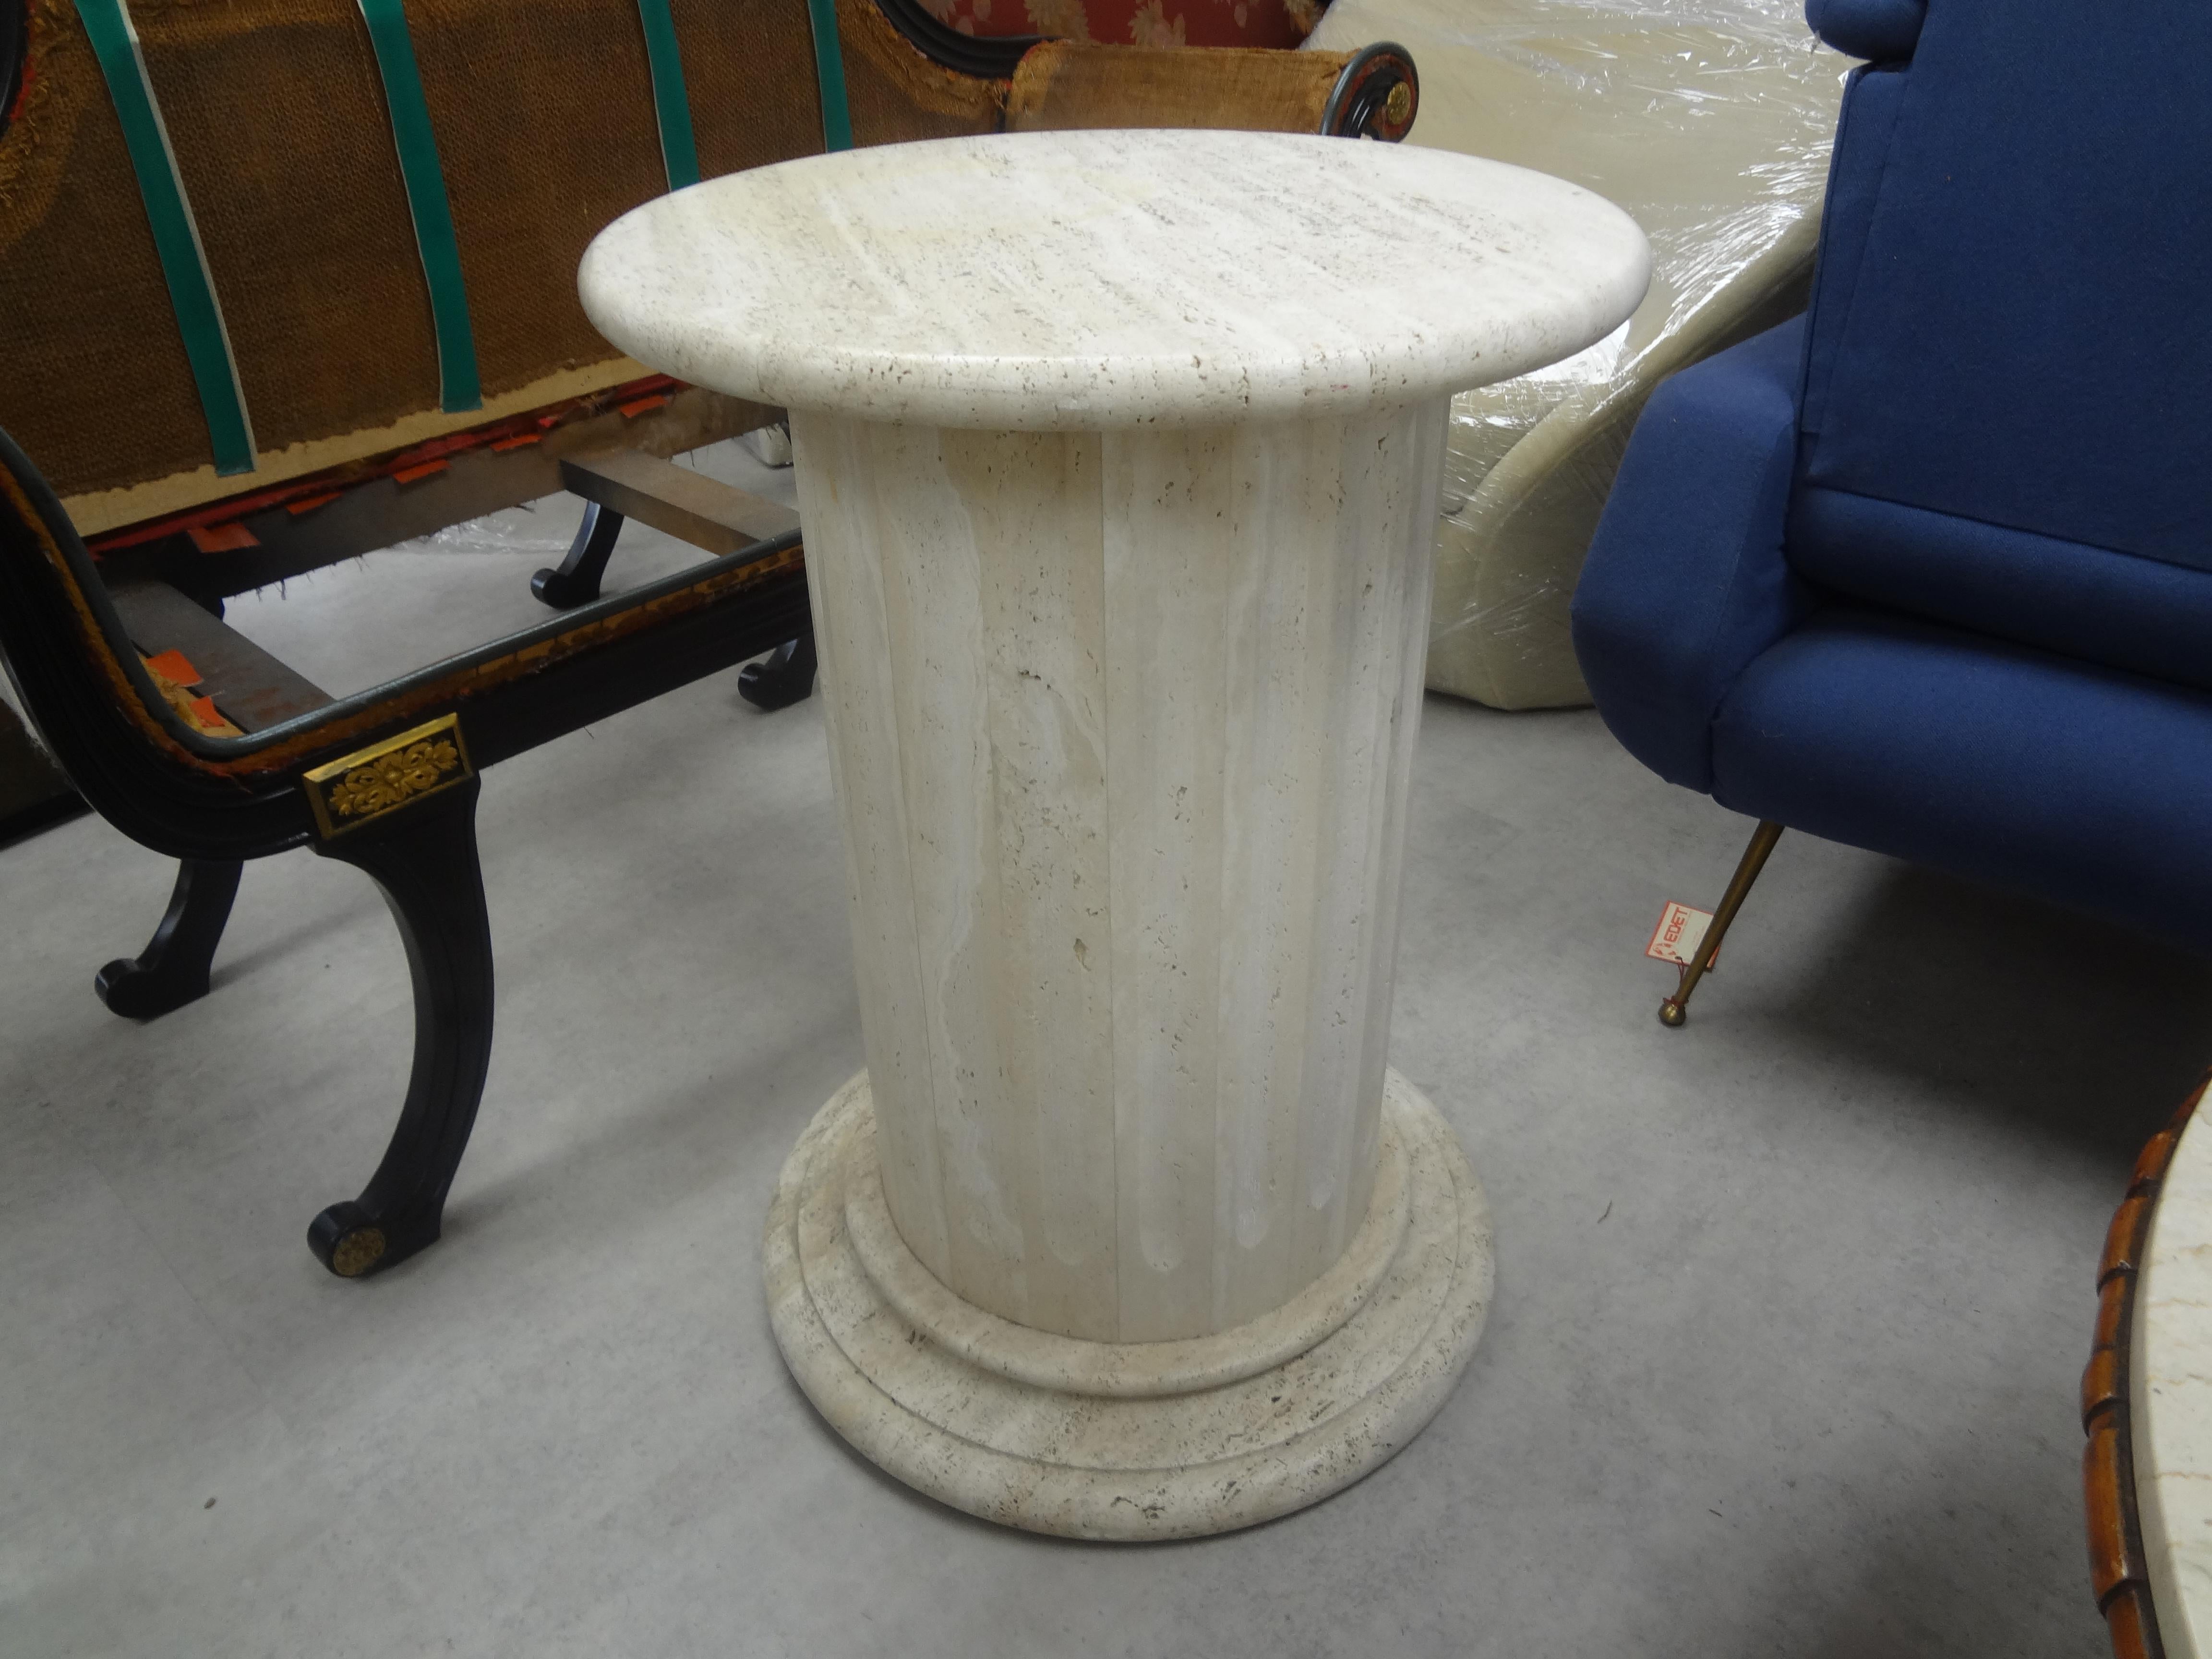 Italian Mario Bellini style fluted travertine pedestal or table base. This stunning postmodern honed travertine pedestal is substantial enough for a large heavy sculpture or as a centre or dining table